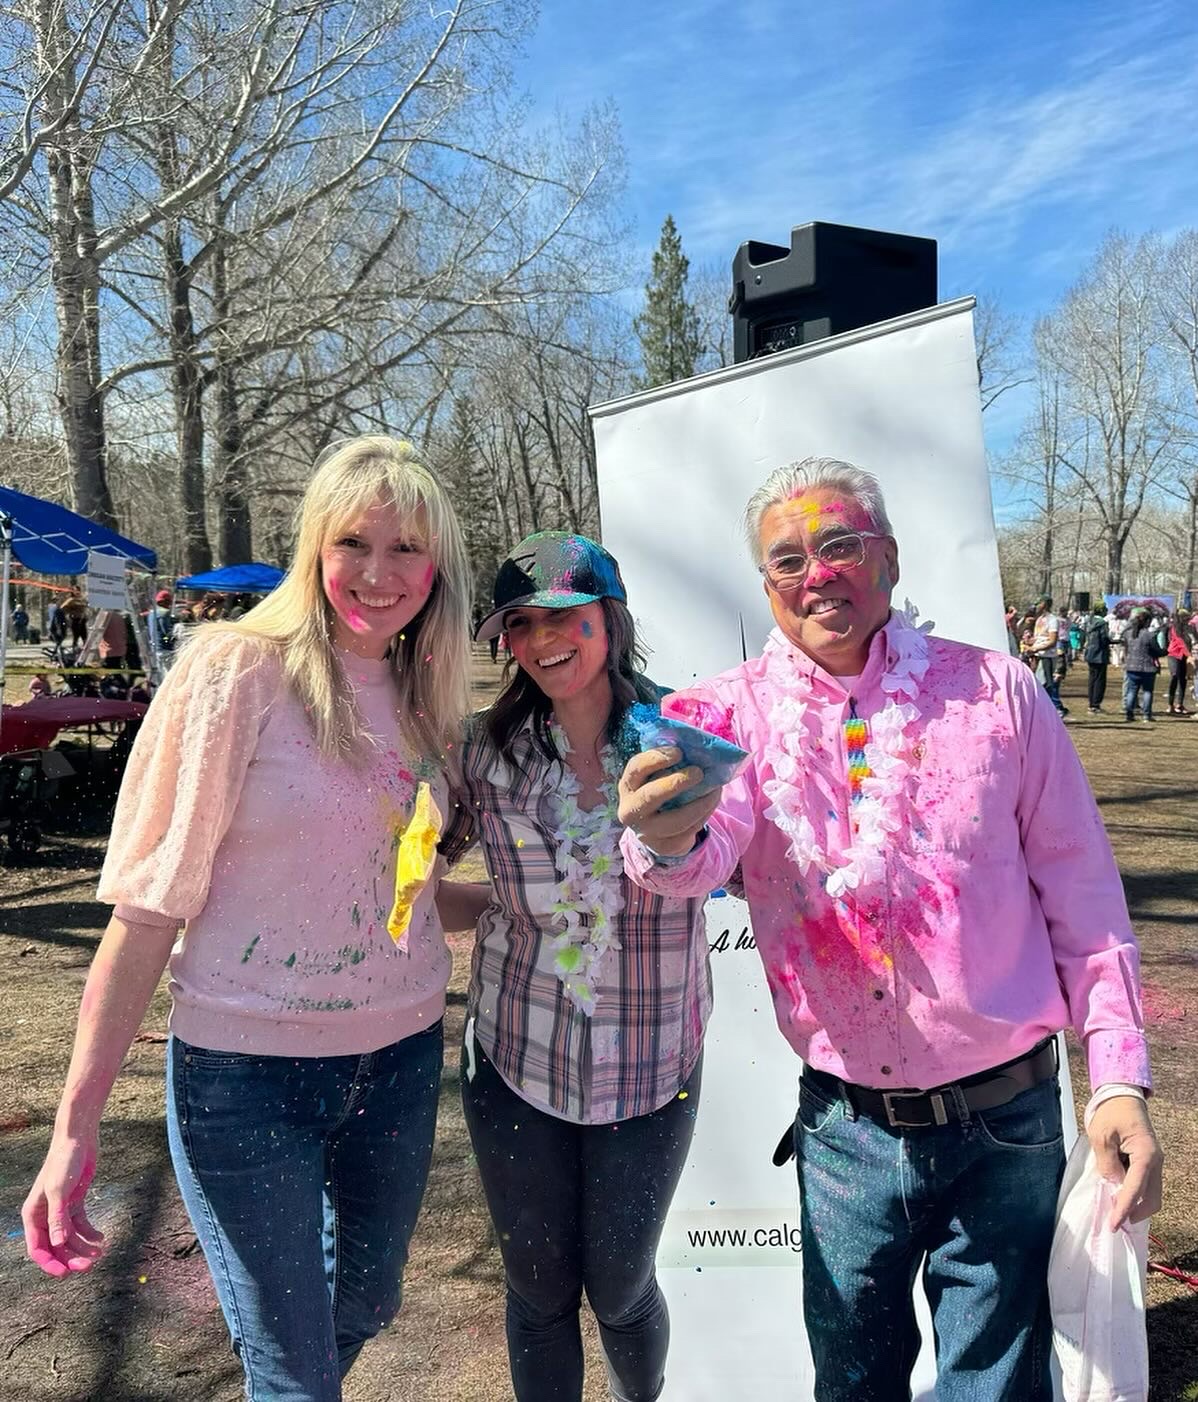 Councillors Wyness, Sharp, and Wong celebrating Holi in Bowness Park